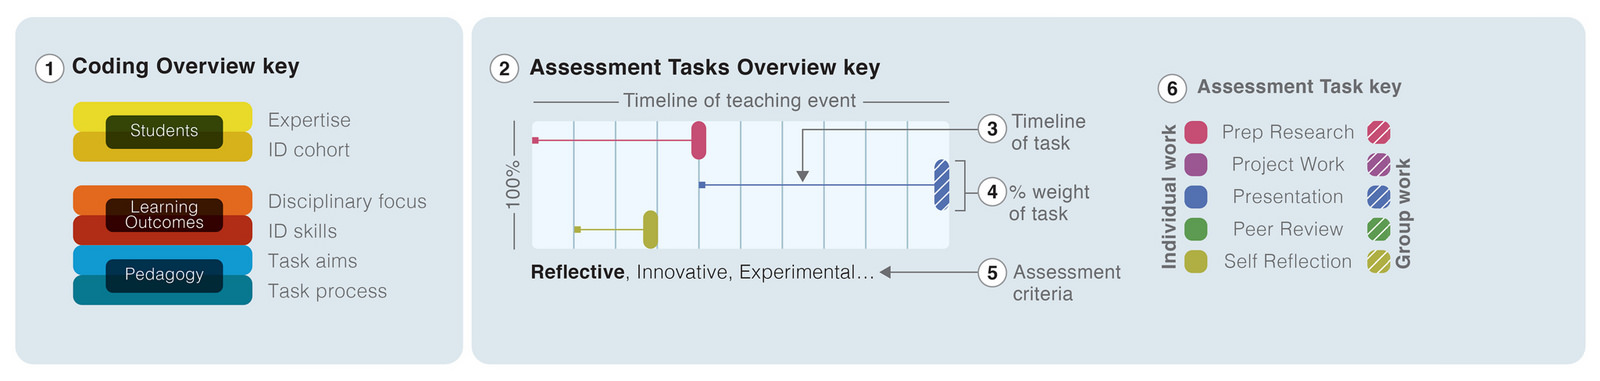 assessment tasks key and example